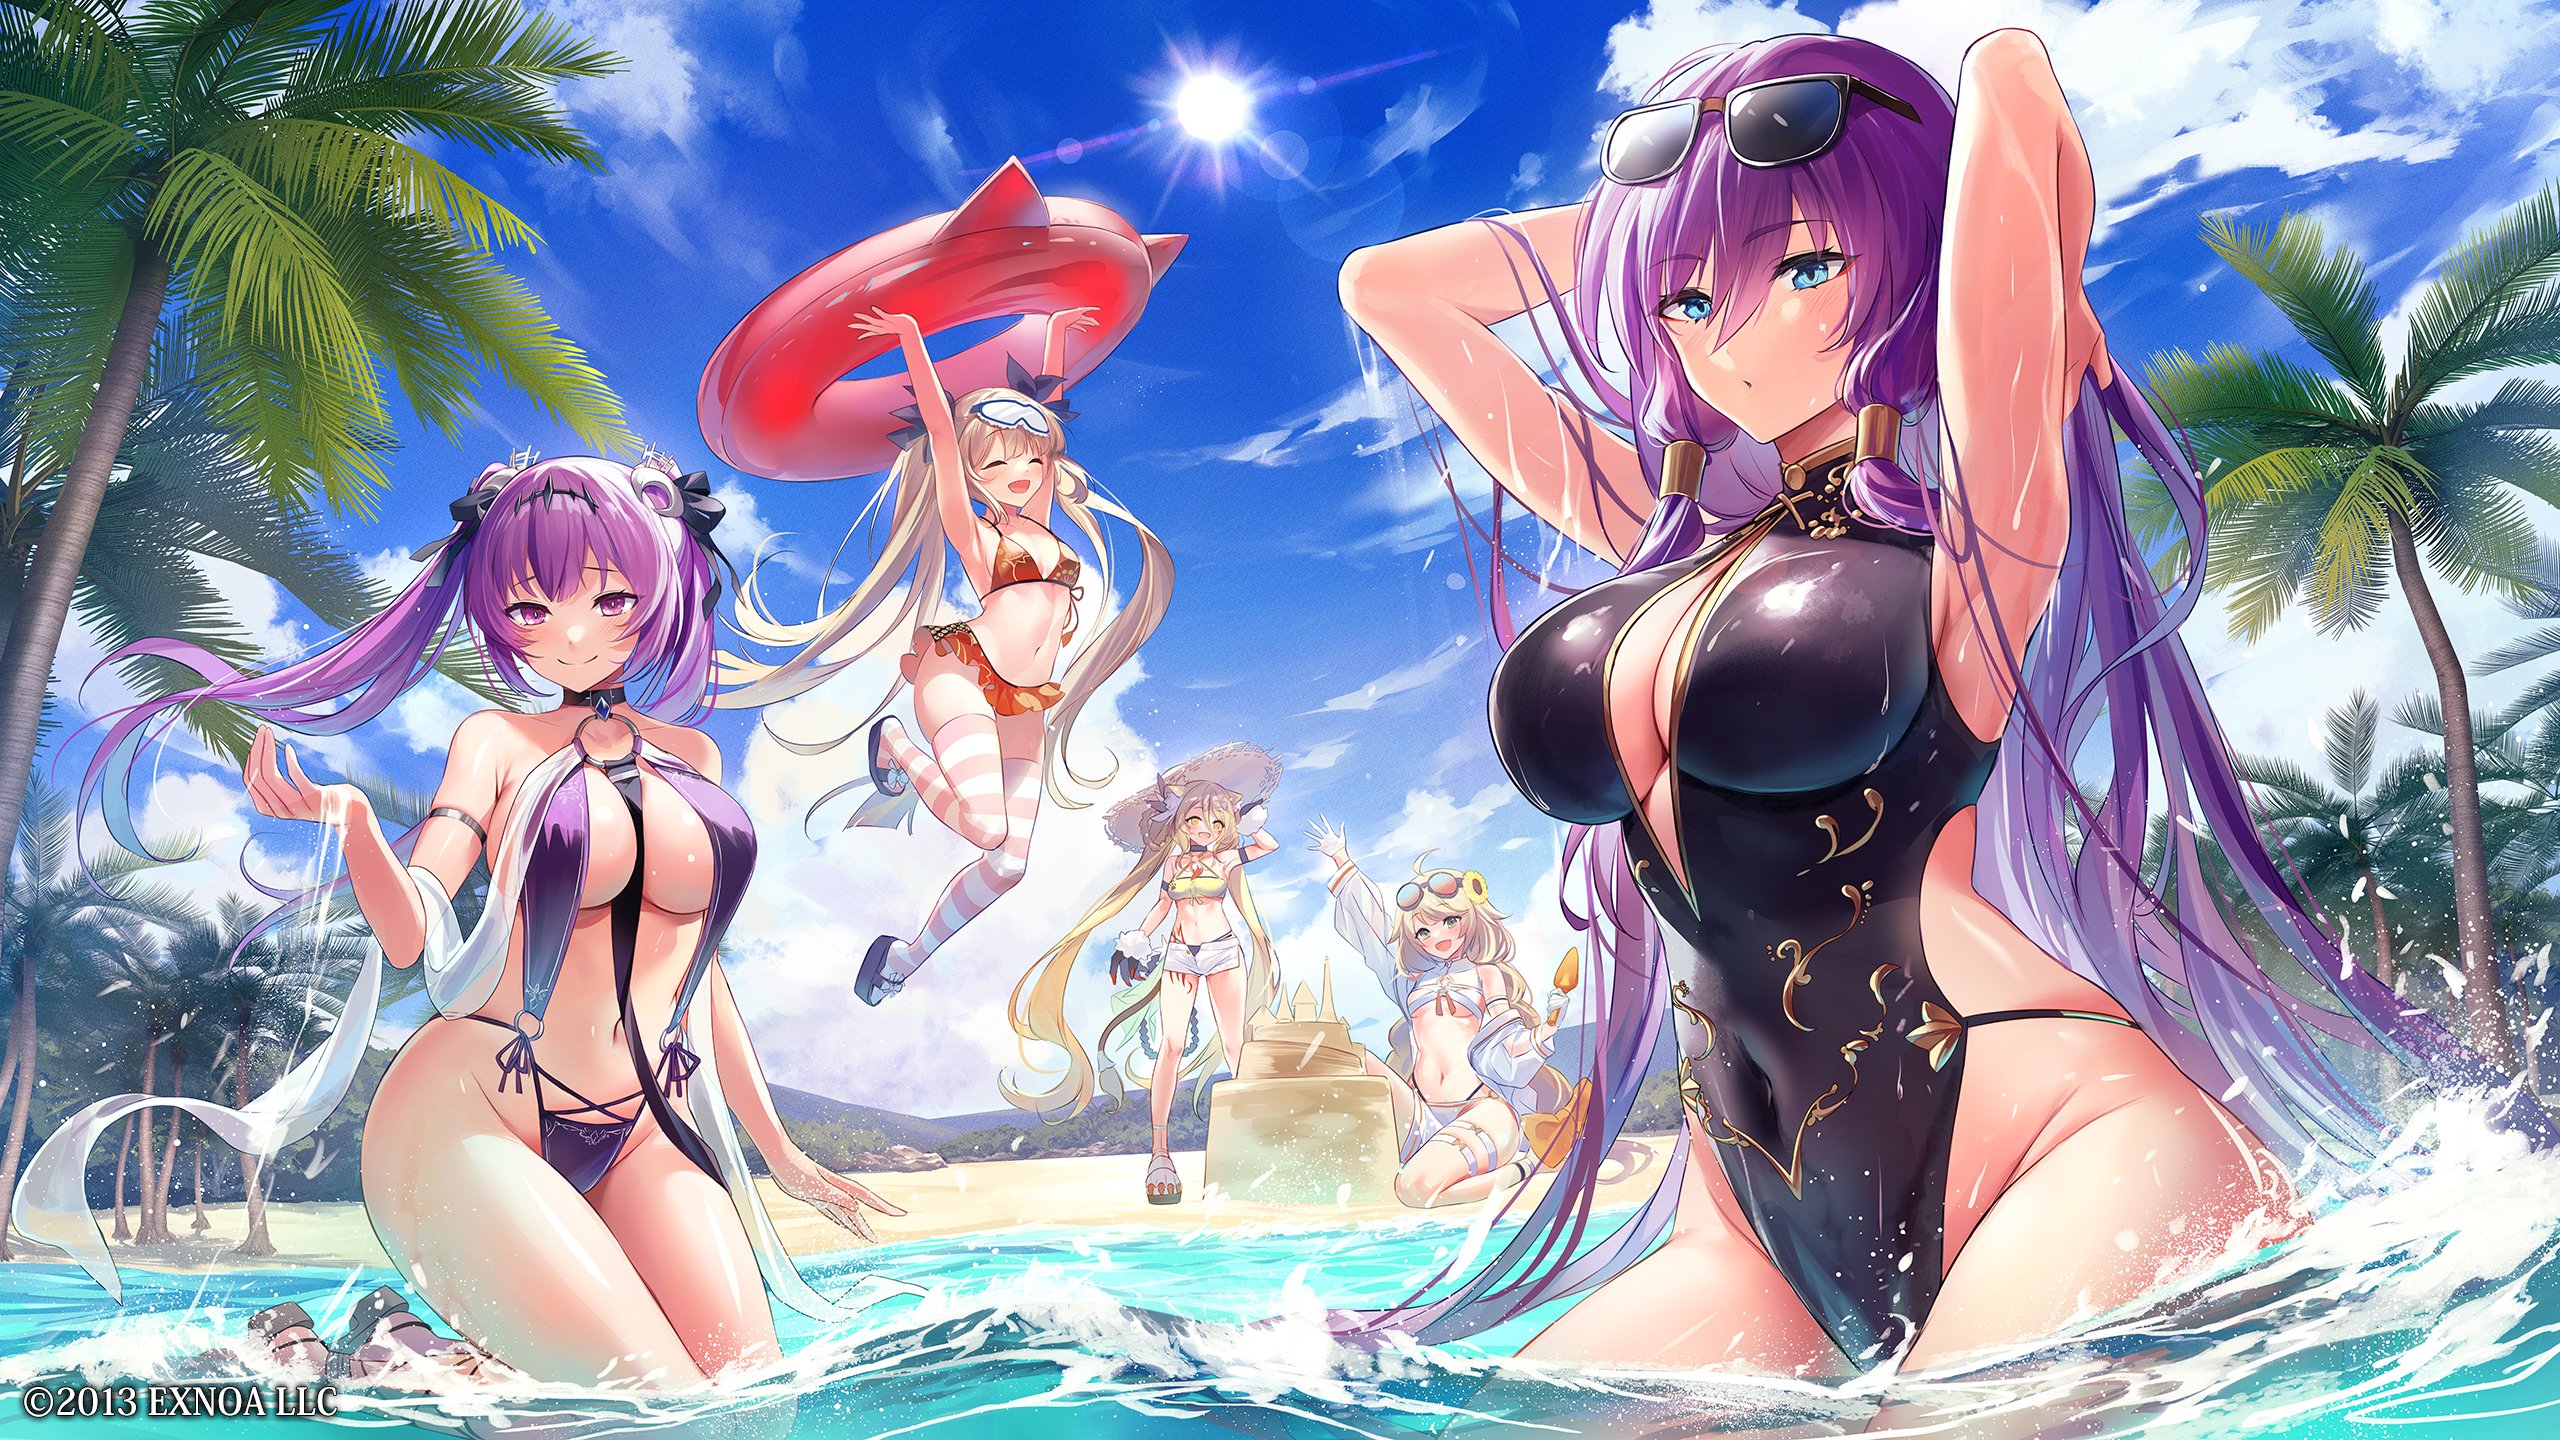 Anime 2560x1440 Sennen Sensou Aigis sky group of women bikini swimwear water drops hands in hair sand castle looking at viewer beach one-piece swimsuit clouds boobs women on beach women outdoors water Erlang Shen (Sennen Sensou Aigis) Hatsune (Sennen Sensou Aigis) Hecatie (Sennen Sensou Aigis) Leone (Sennen Sensou Aigis) Patricia (Sennen Sensou Aigis) hair ornament floater floating bare shoulders striped leggings armpits palm trees open mouth twintails sunglasses arms up big boobs watermarked thighs wet body long hair kneeling smiling cleavage cutout wet Sun anime girls